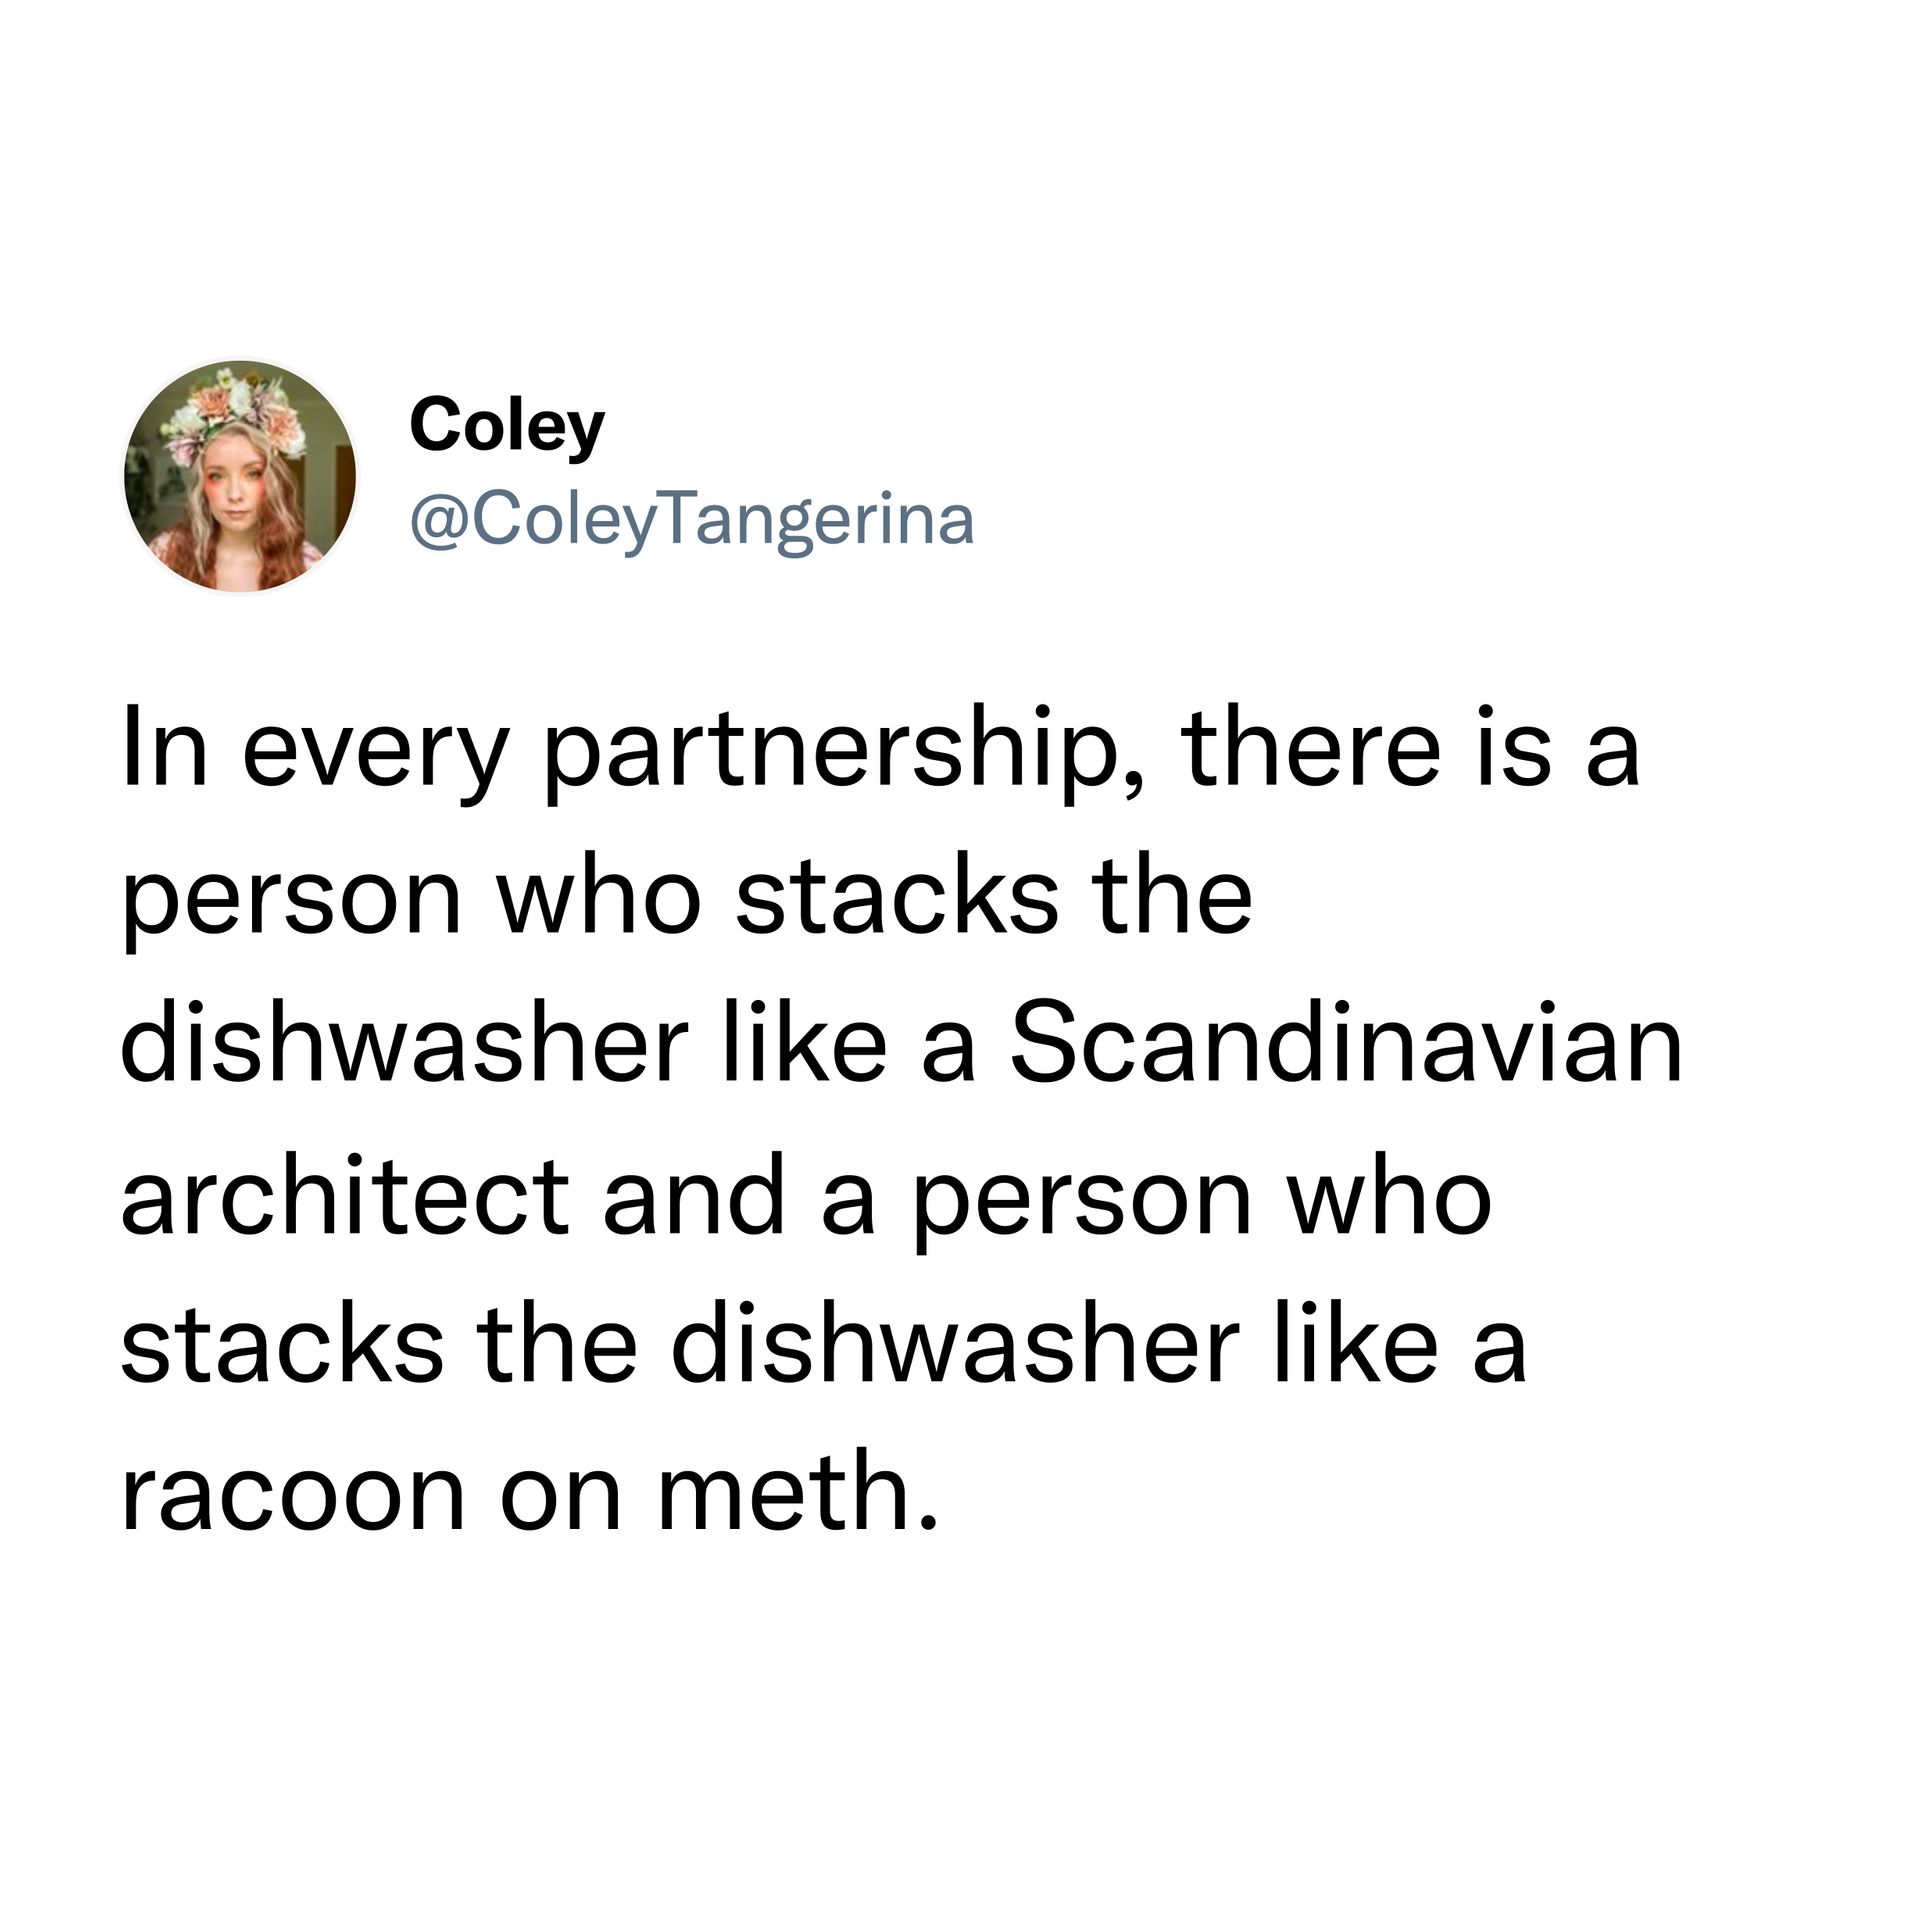 marriage tweet funny -In every partnership, there is a person who stacks the dishwasher like a Scandinavian a architect and a person who stacks the dishwasher like a racoon on meth.